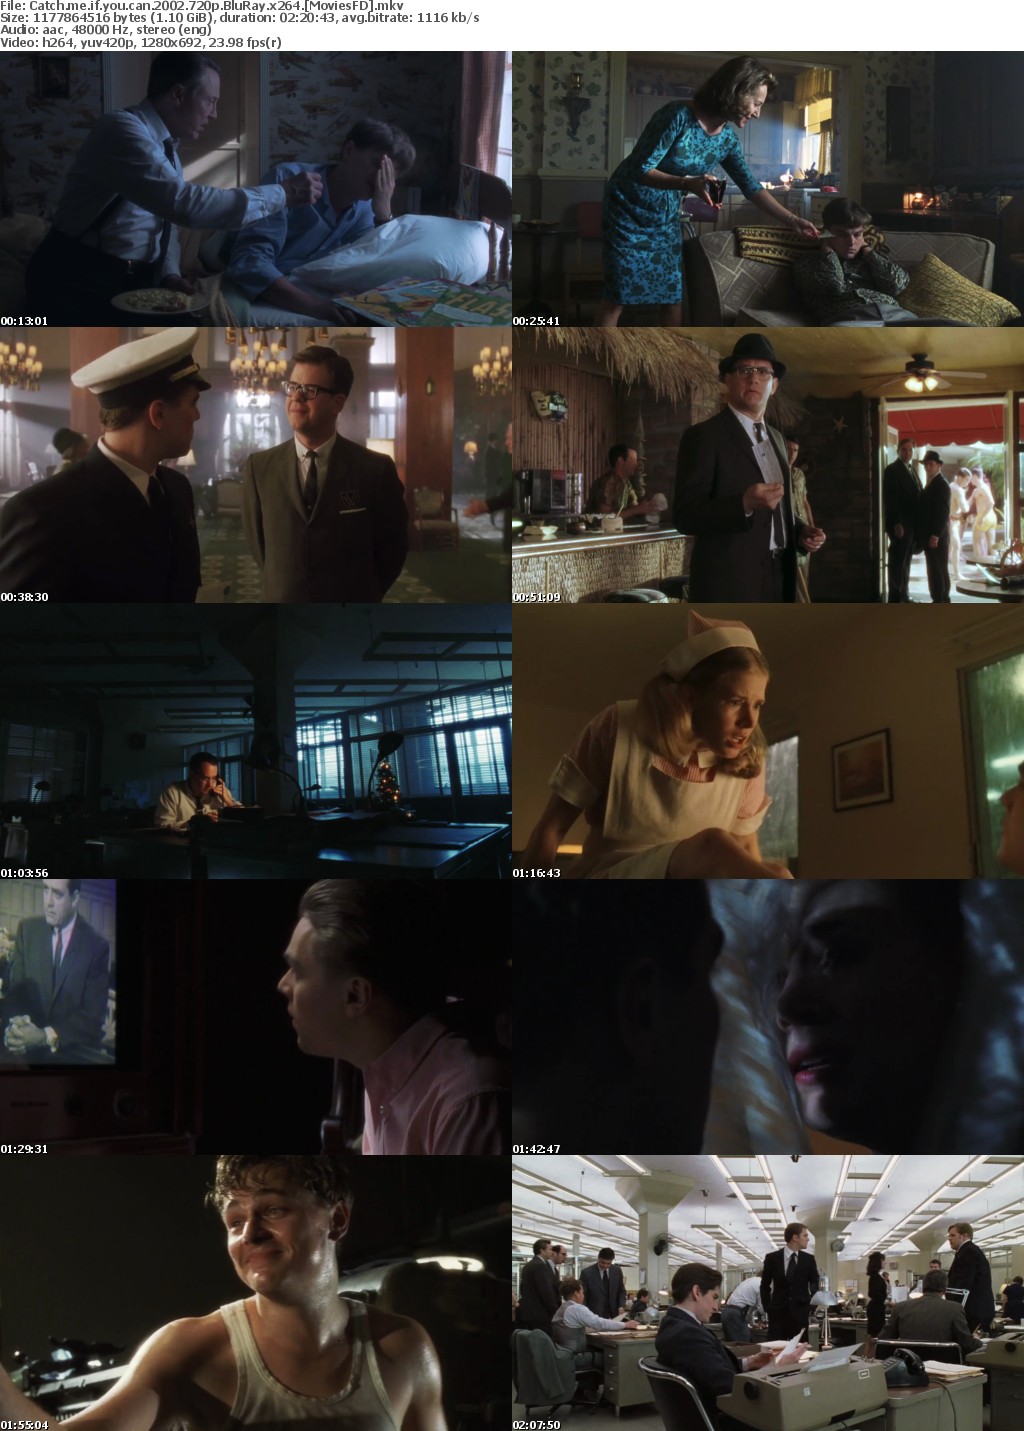 Catch Me if You Can (2002) 720P Bluray X264 Moviesfd